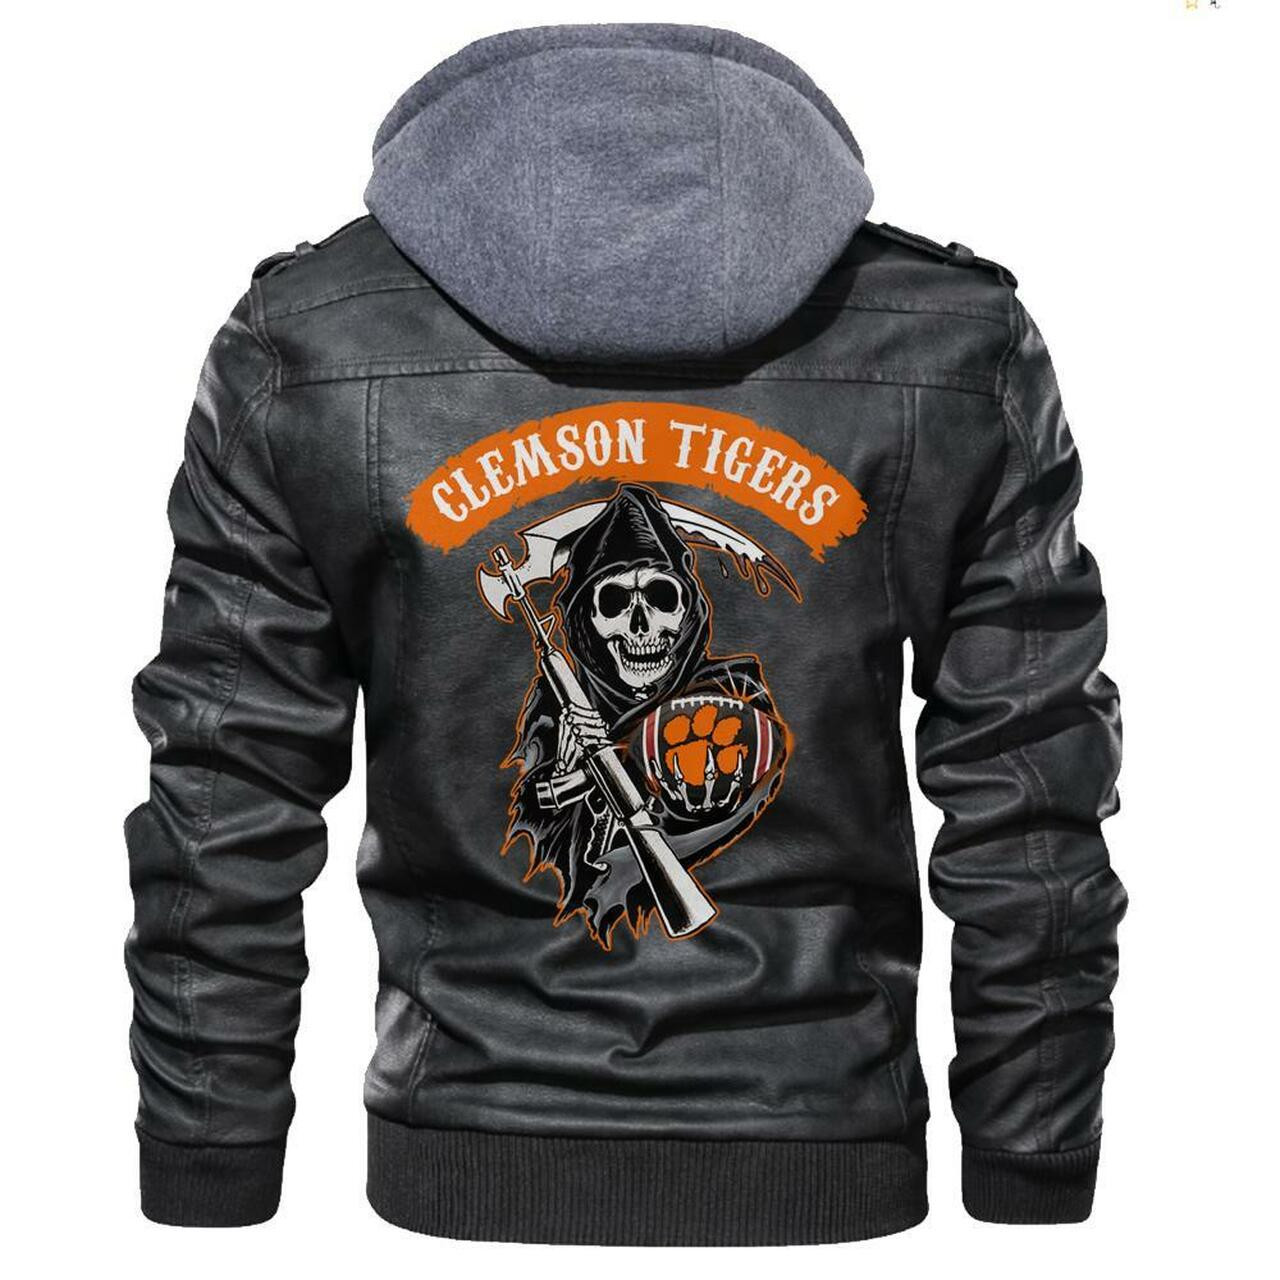 You can find Leather Jacket online at a great price 163